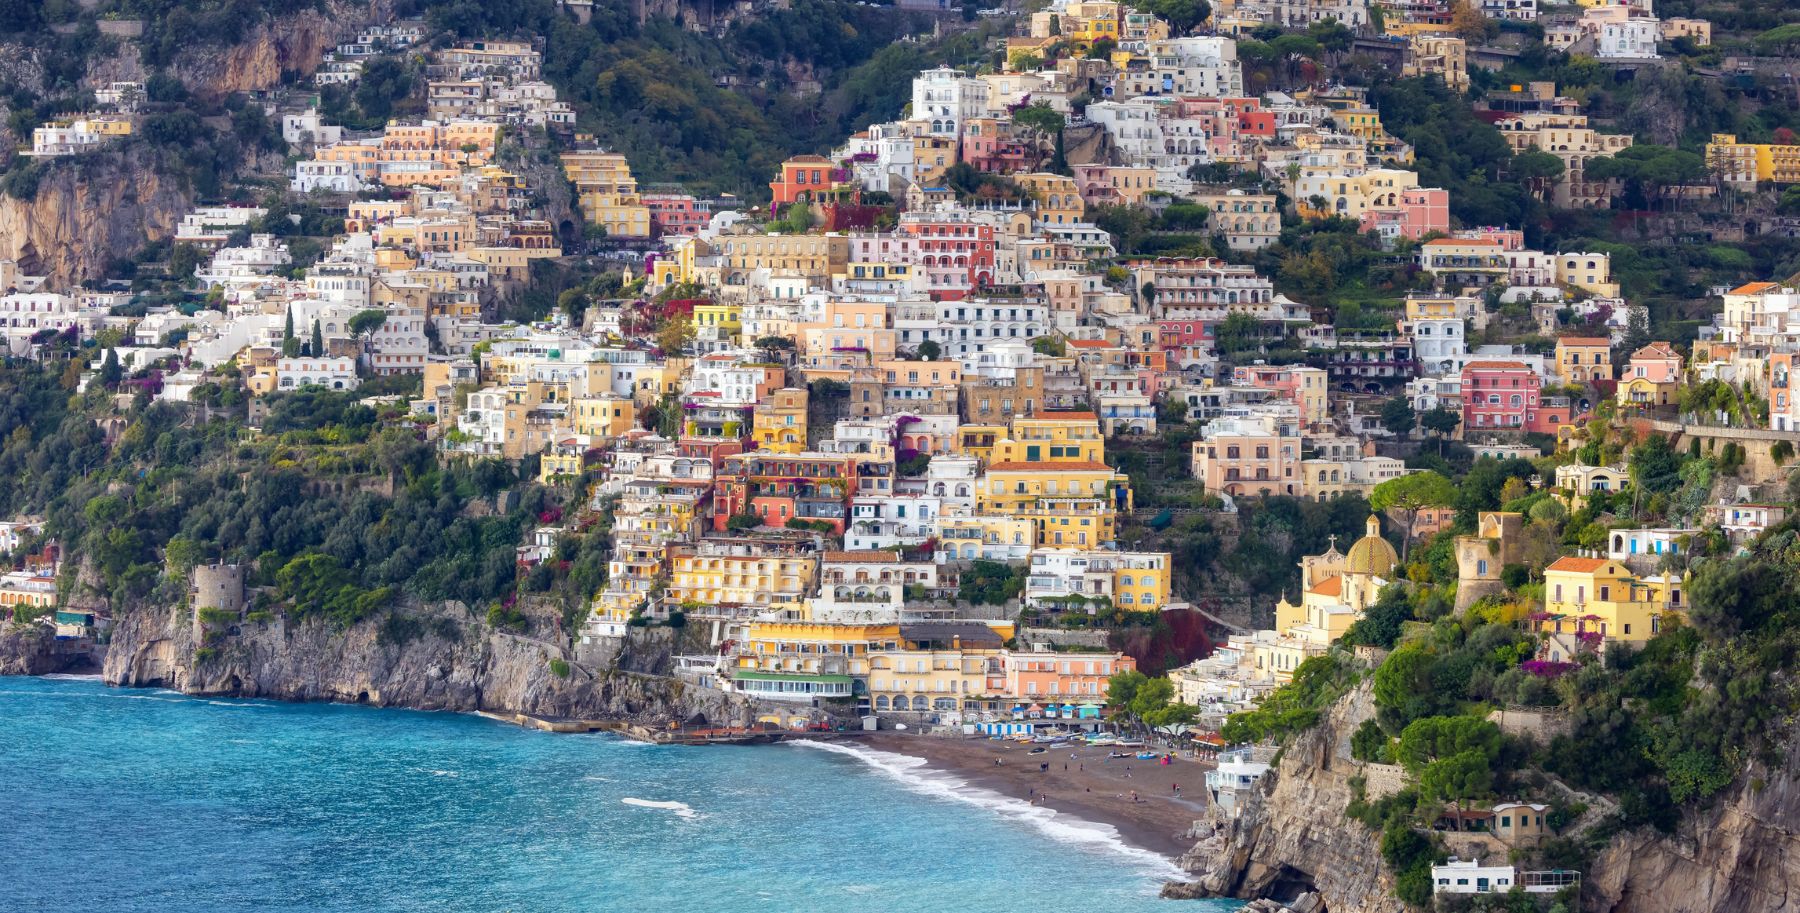 Where is Positano, Italy - A Complete Guide for your Trip